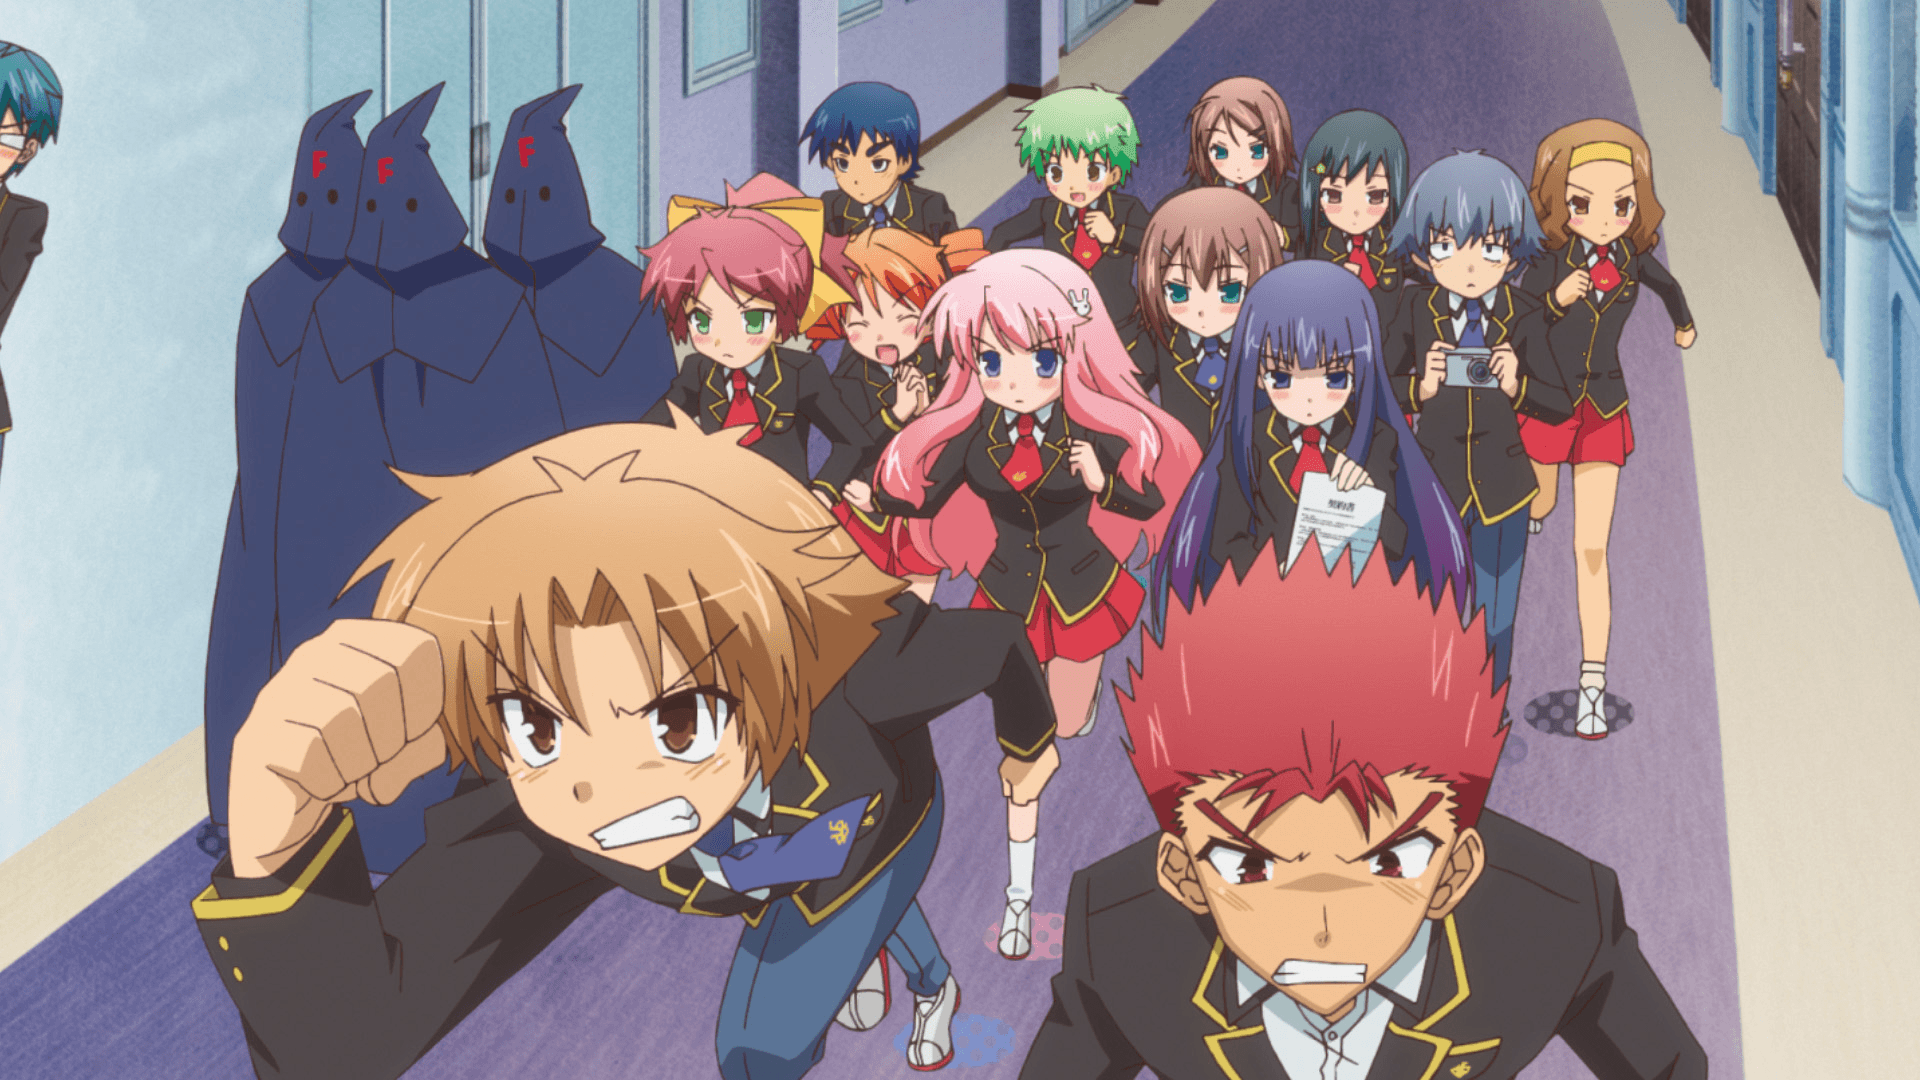 Baka and Test Wallpapers.